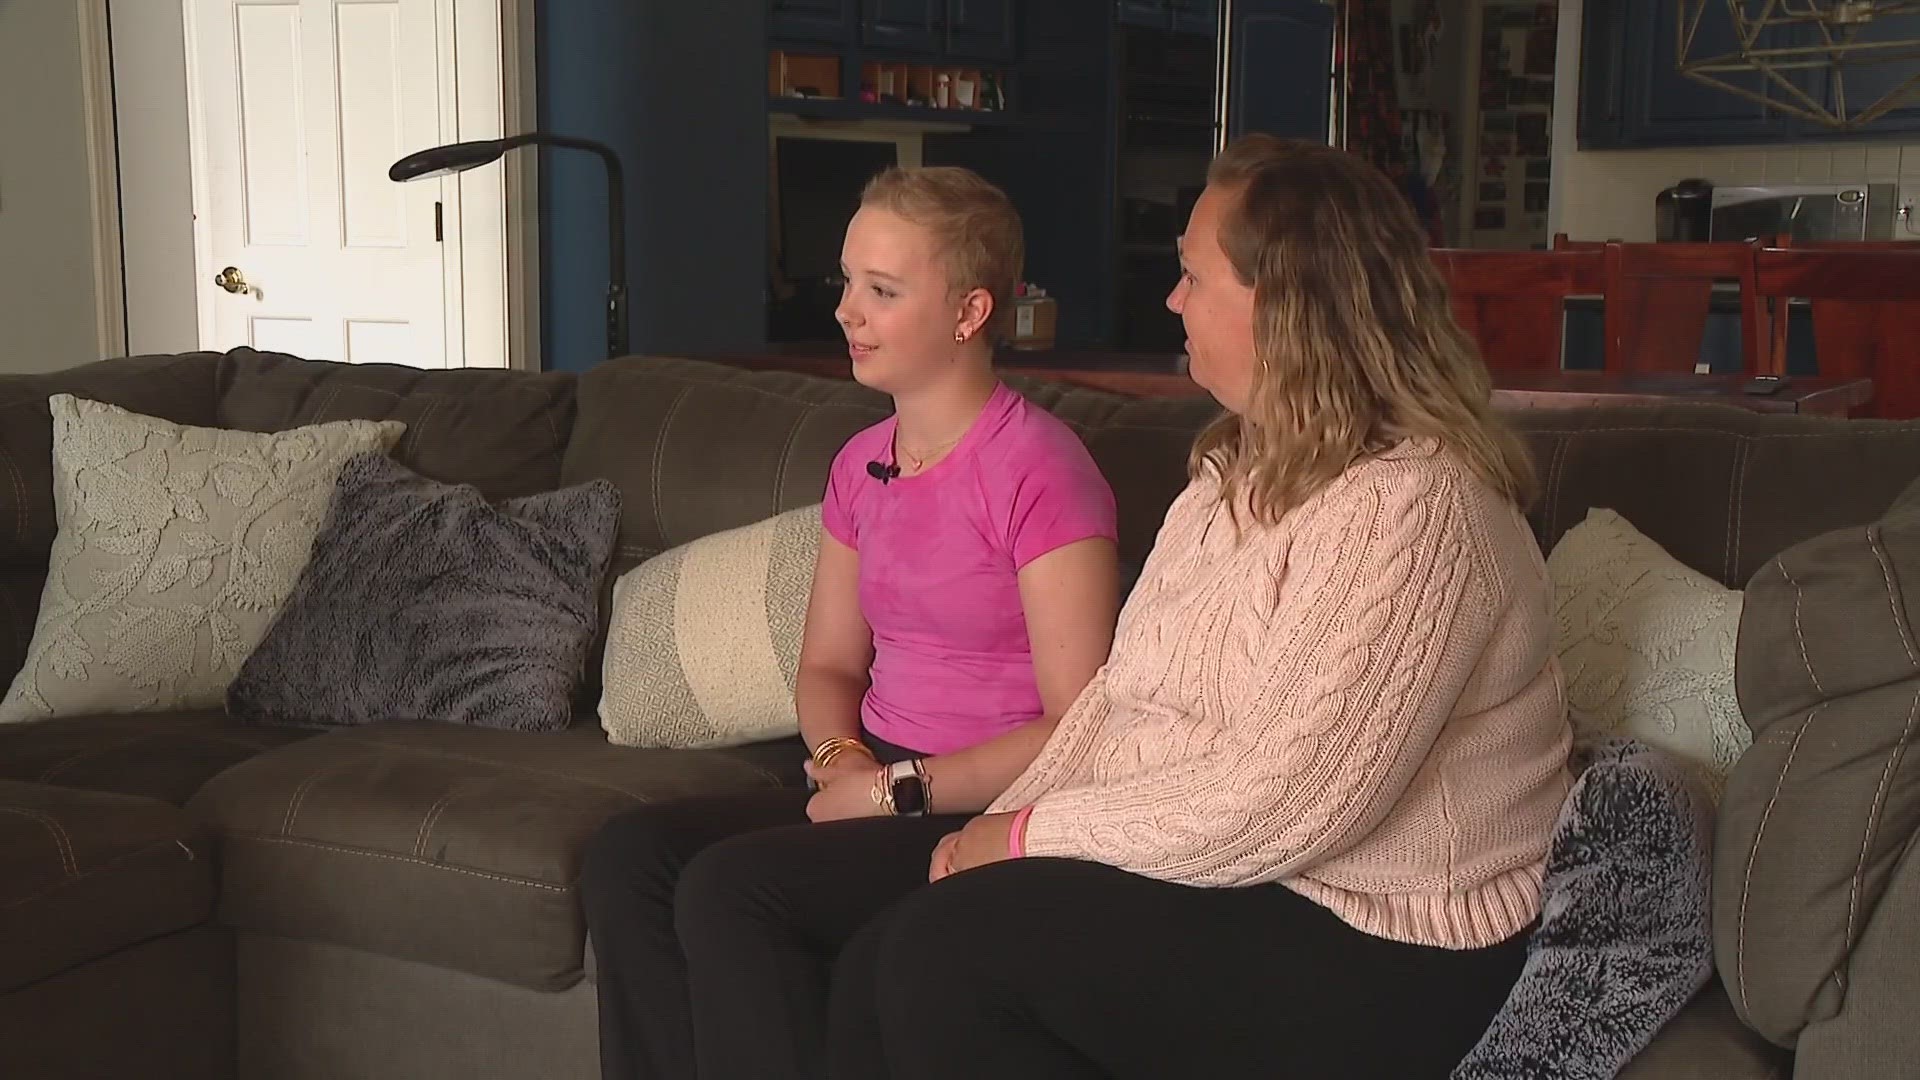 10TV's Yolanda Harris speaks to a family who say they were helped by Nelly's Champions 4 Kids, also known as NC4K.